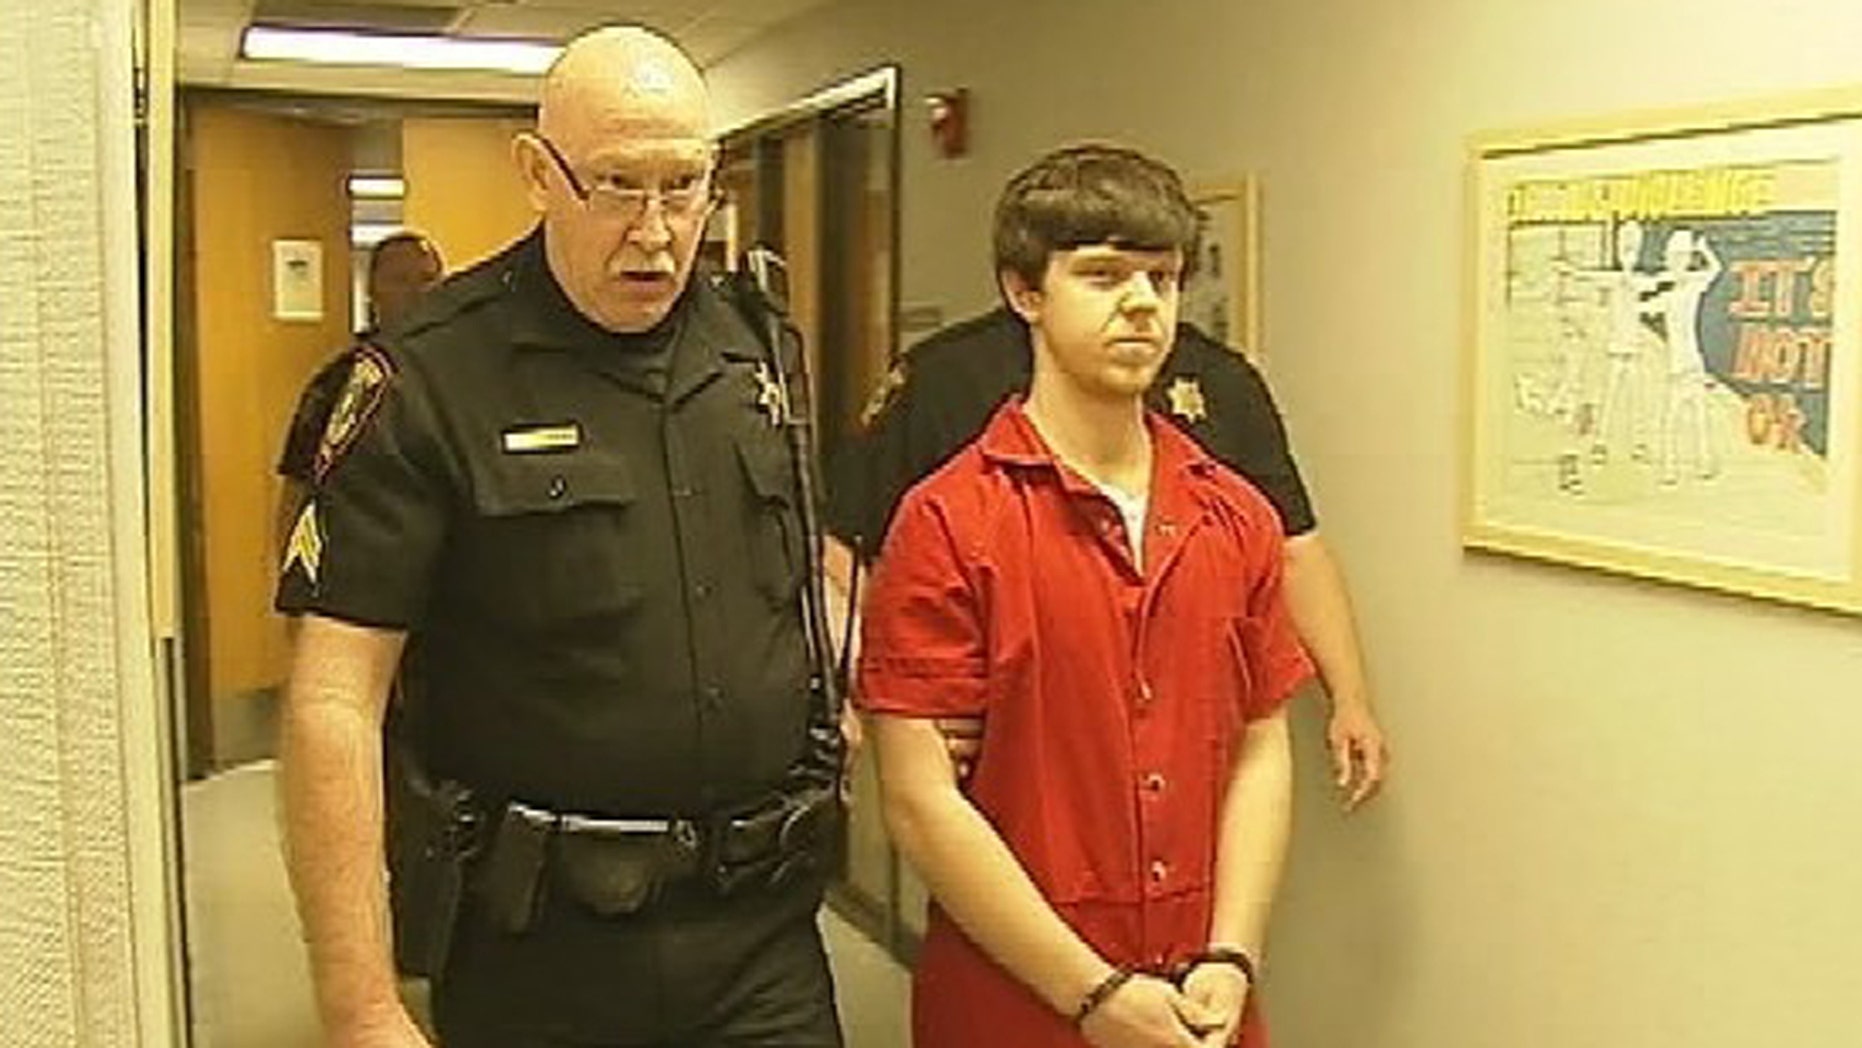 Affluenza Teen Ethan Couch Ordered To Wear Ankle Monitor Undergo 